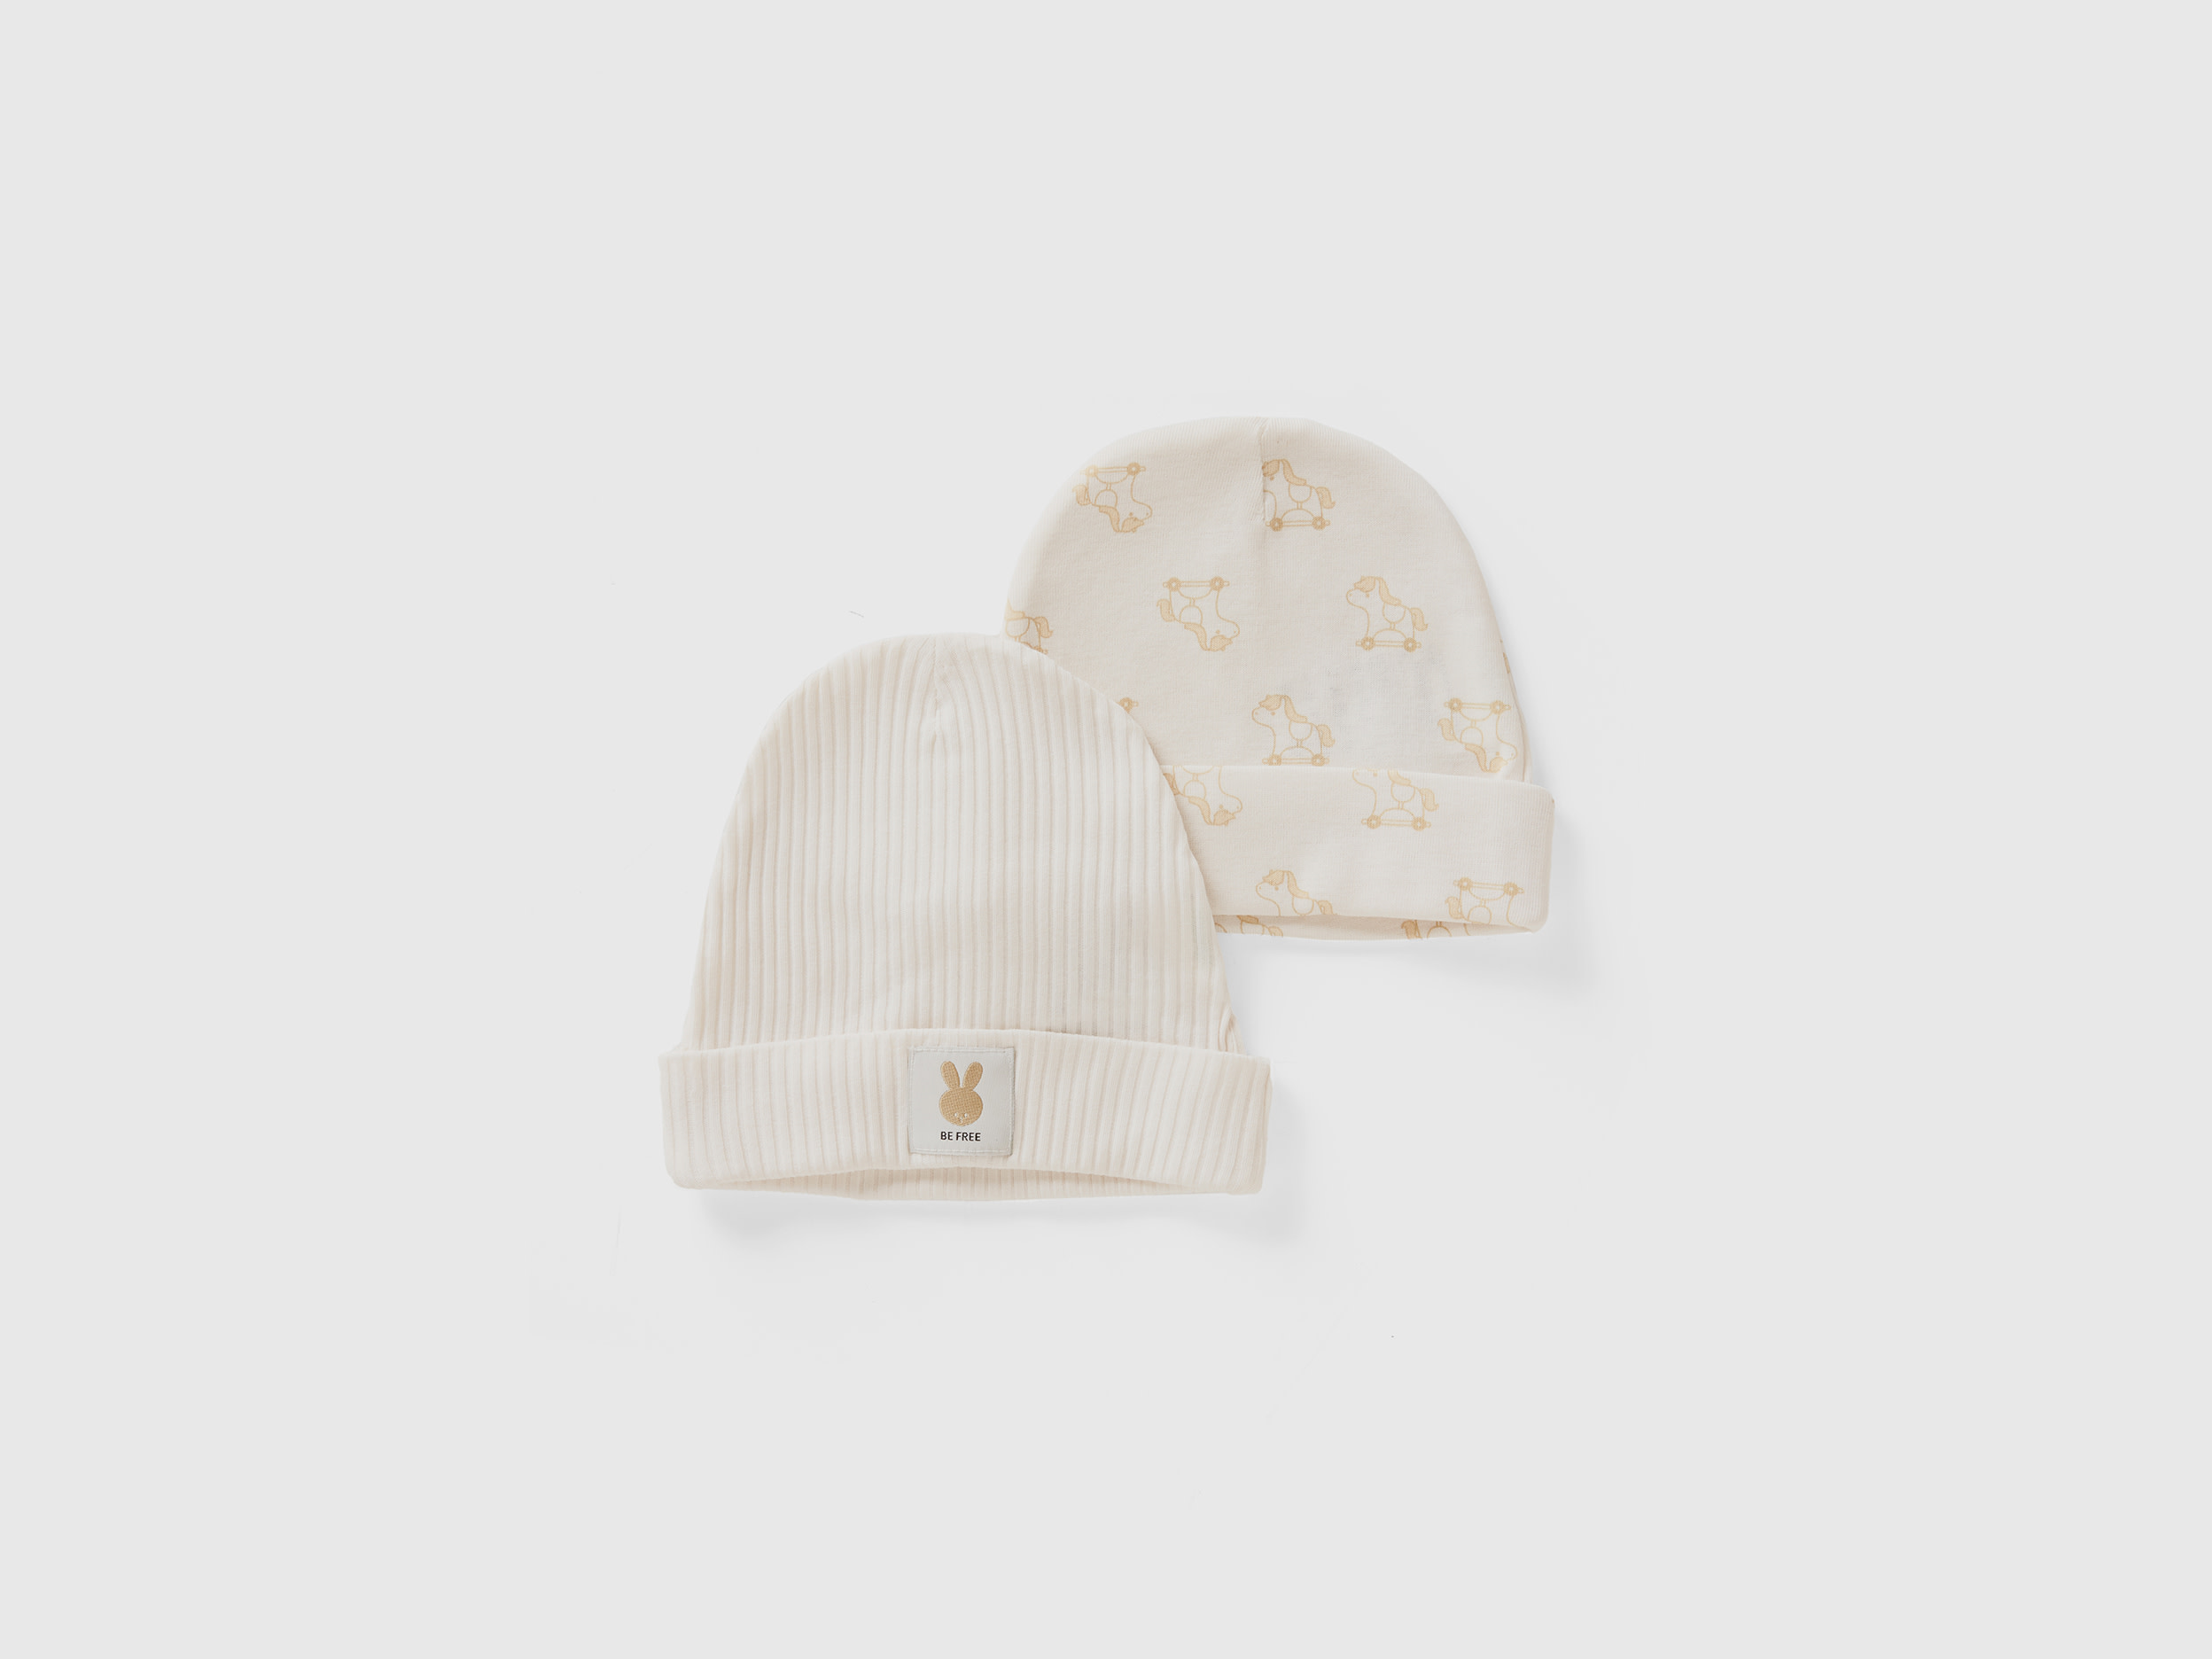 Image of Benetton, Two Caps In Organic Cotton, size 50-56, Creamy White, Kids